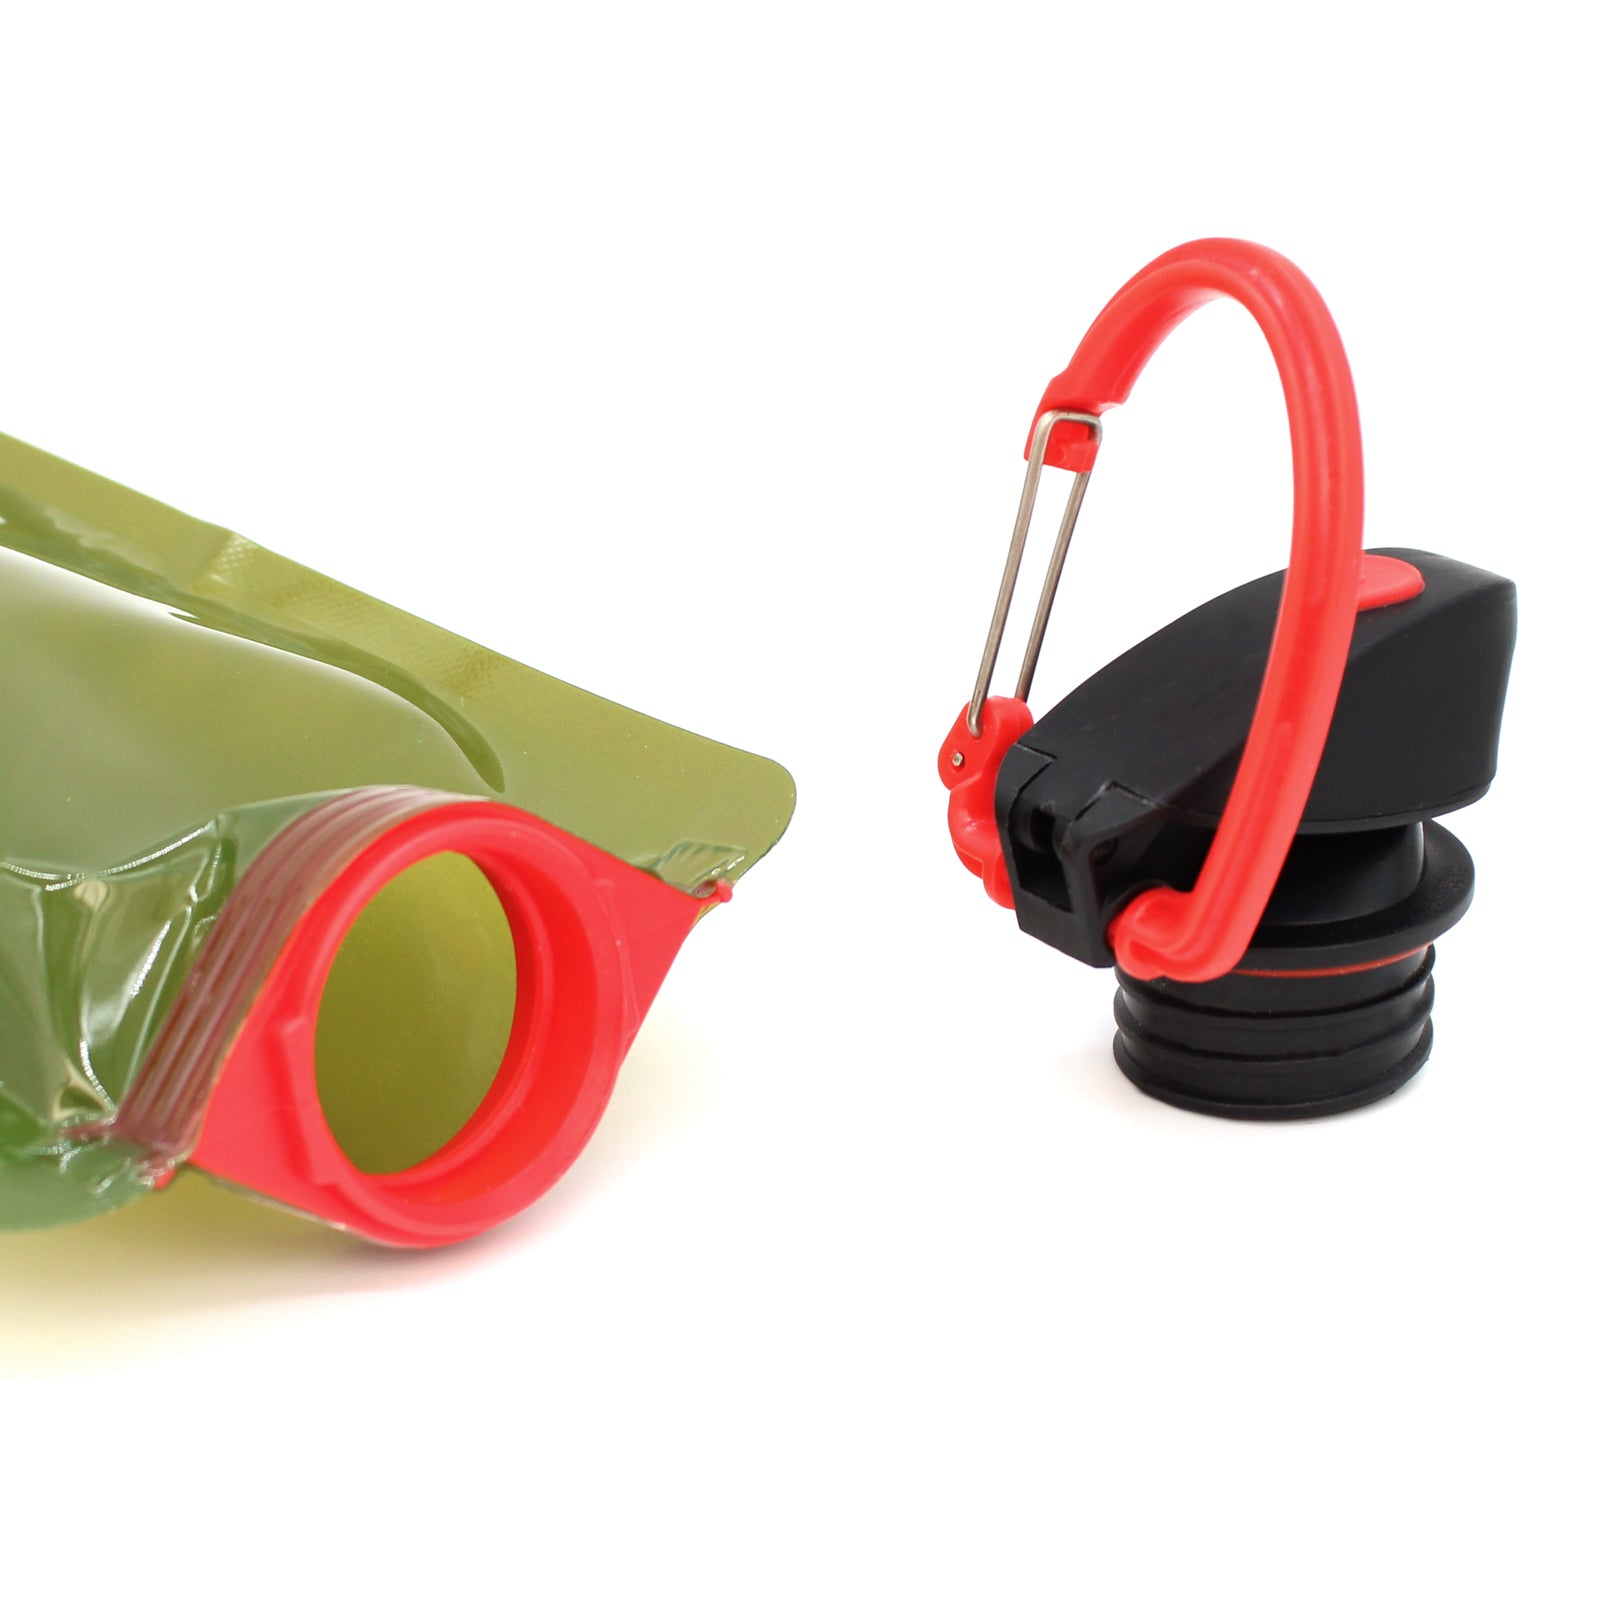 Pinnacle Collapsible Water Bottle with Screw Top Lid